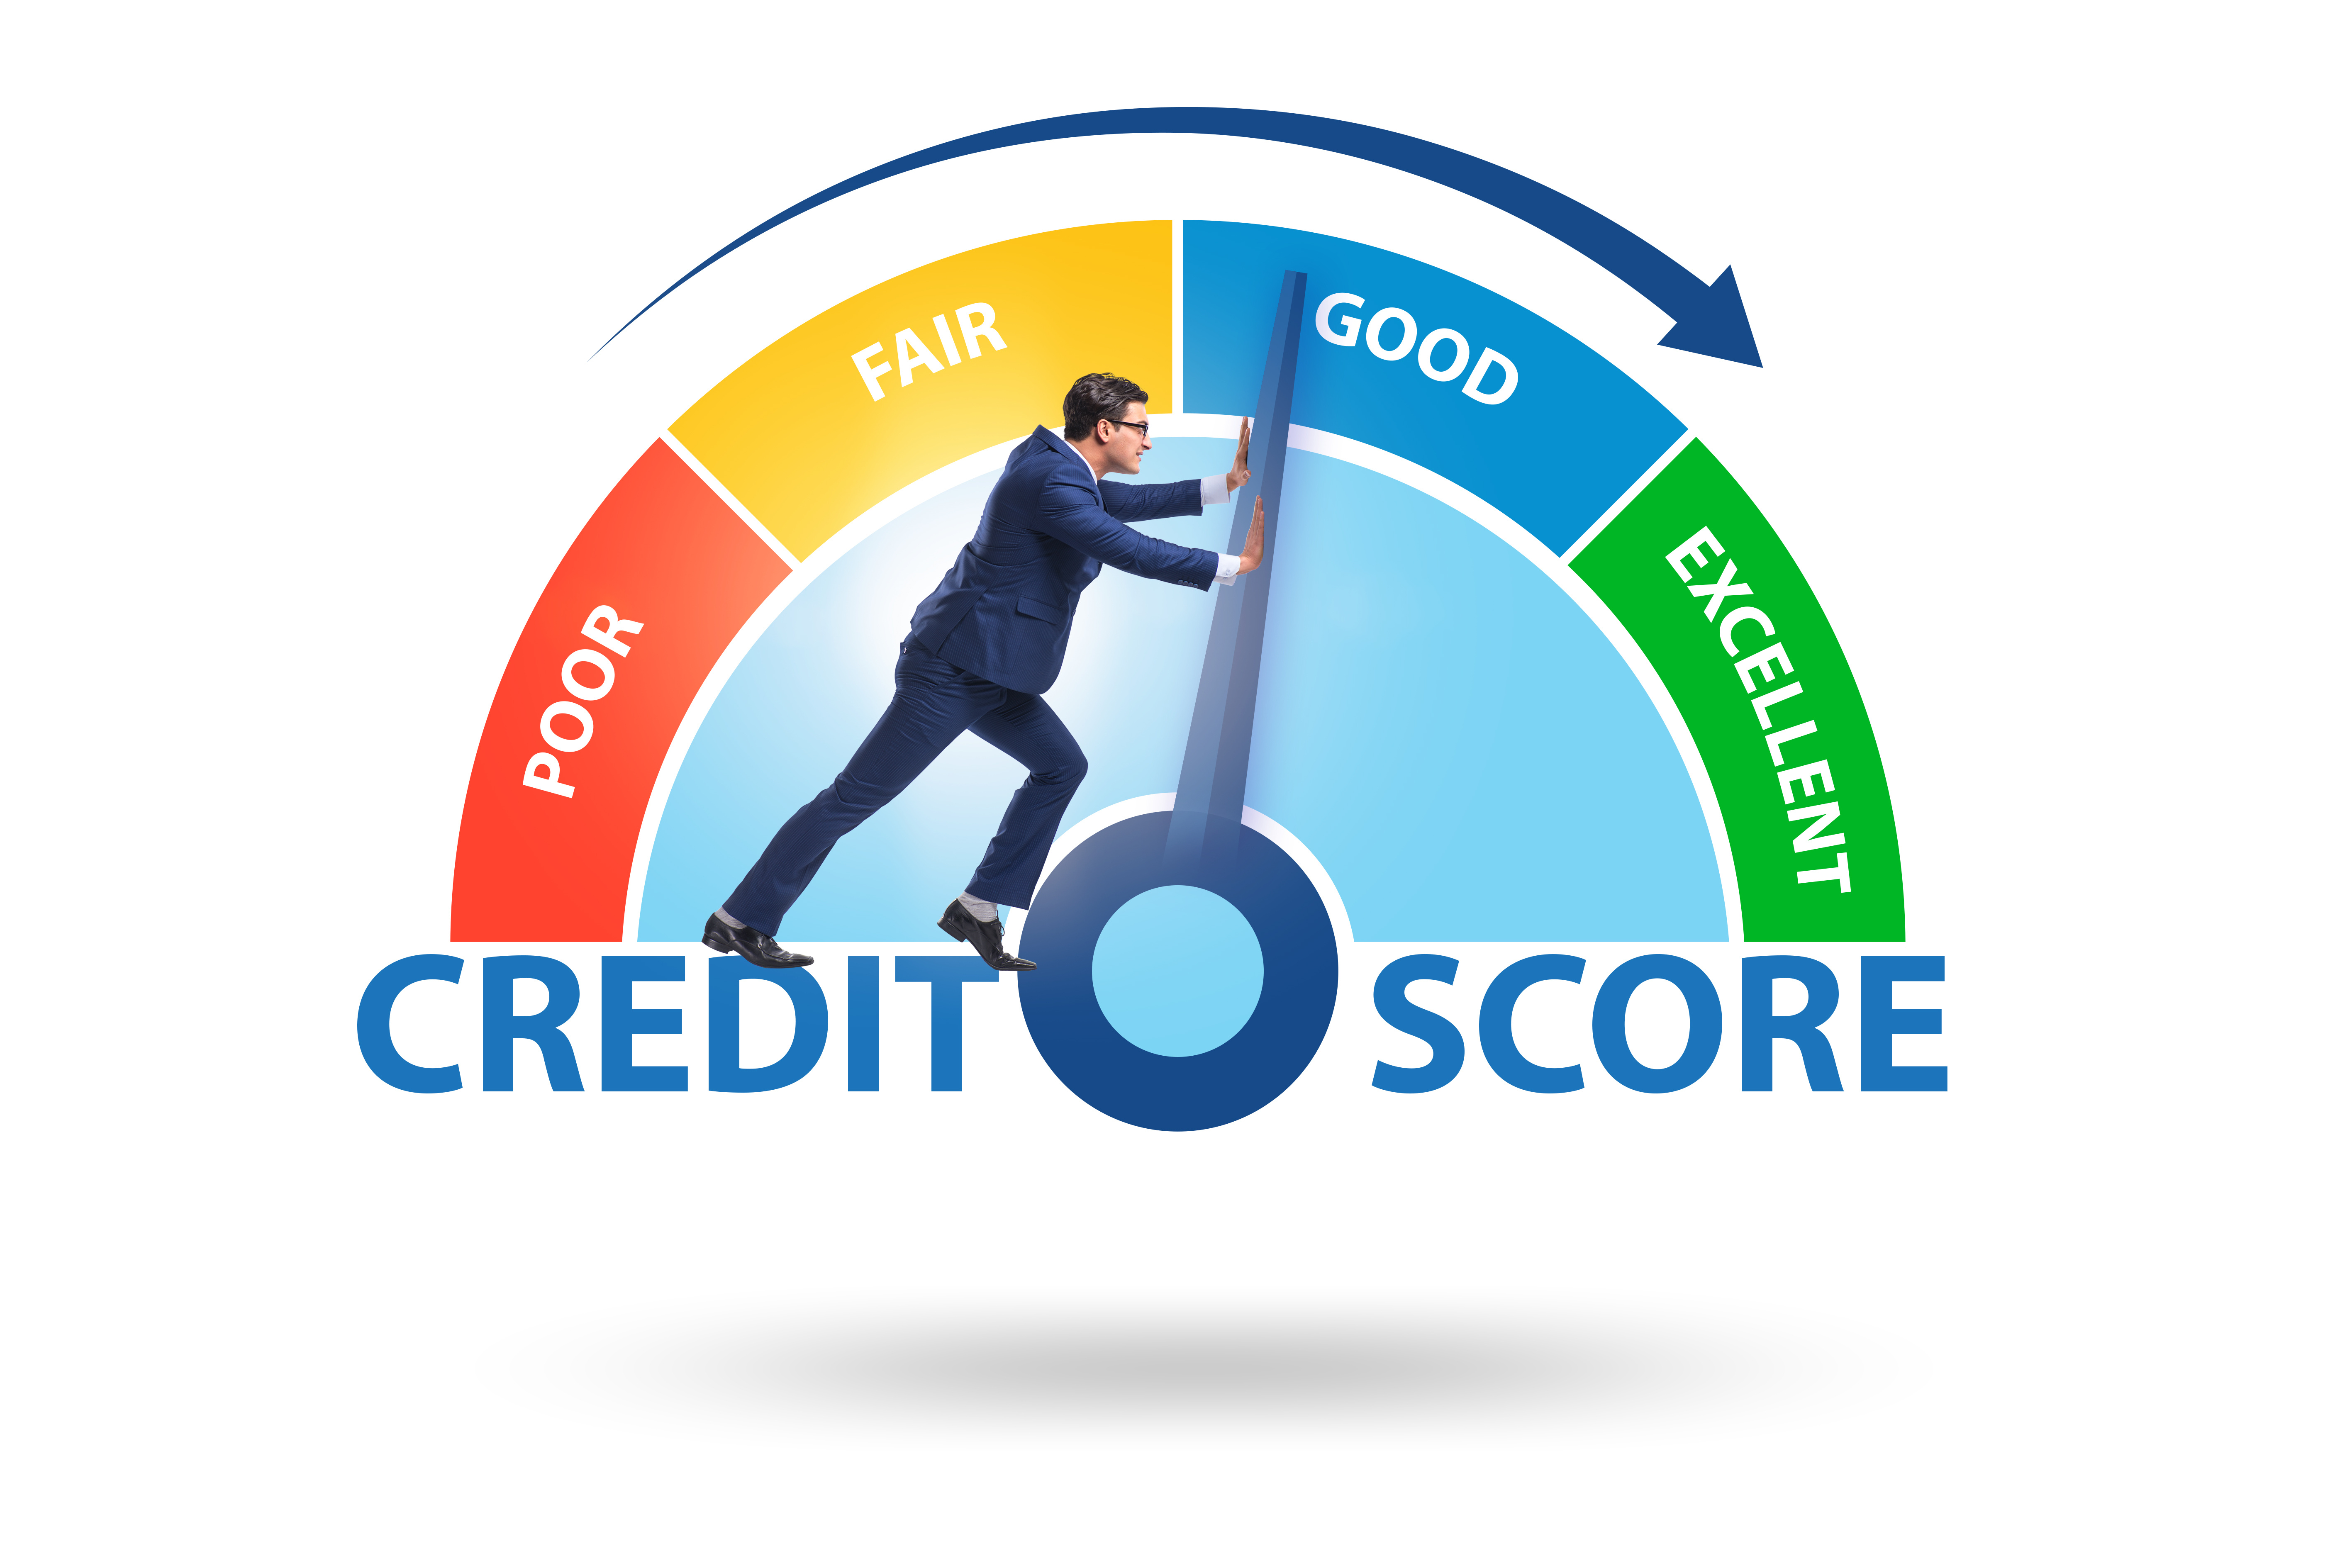 It could take a while to reach an 800 credit score. Source: Adobe Stock.